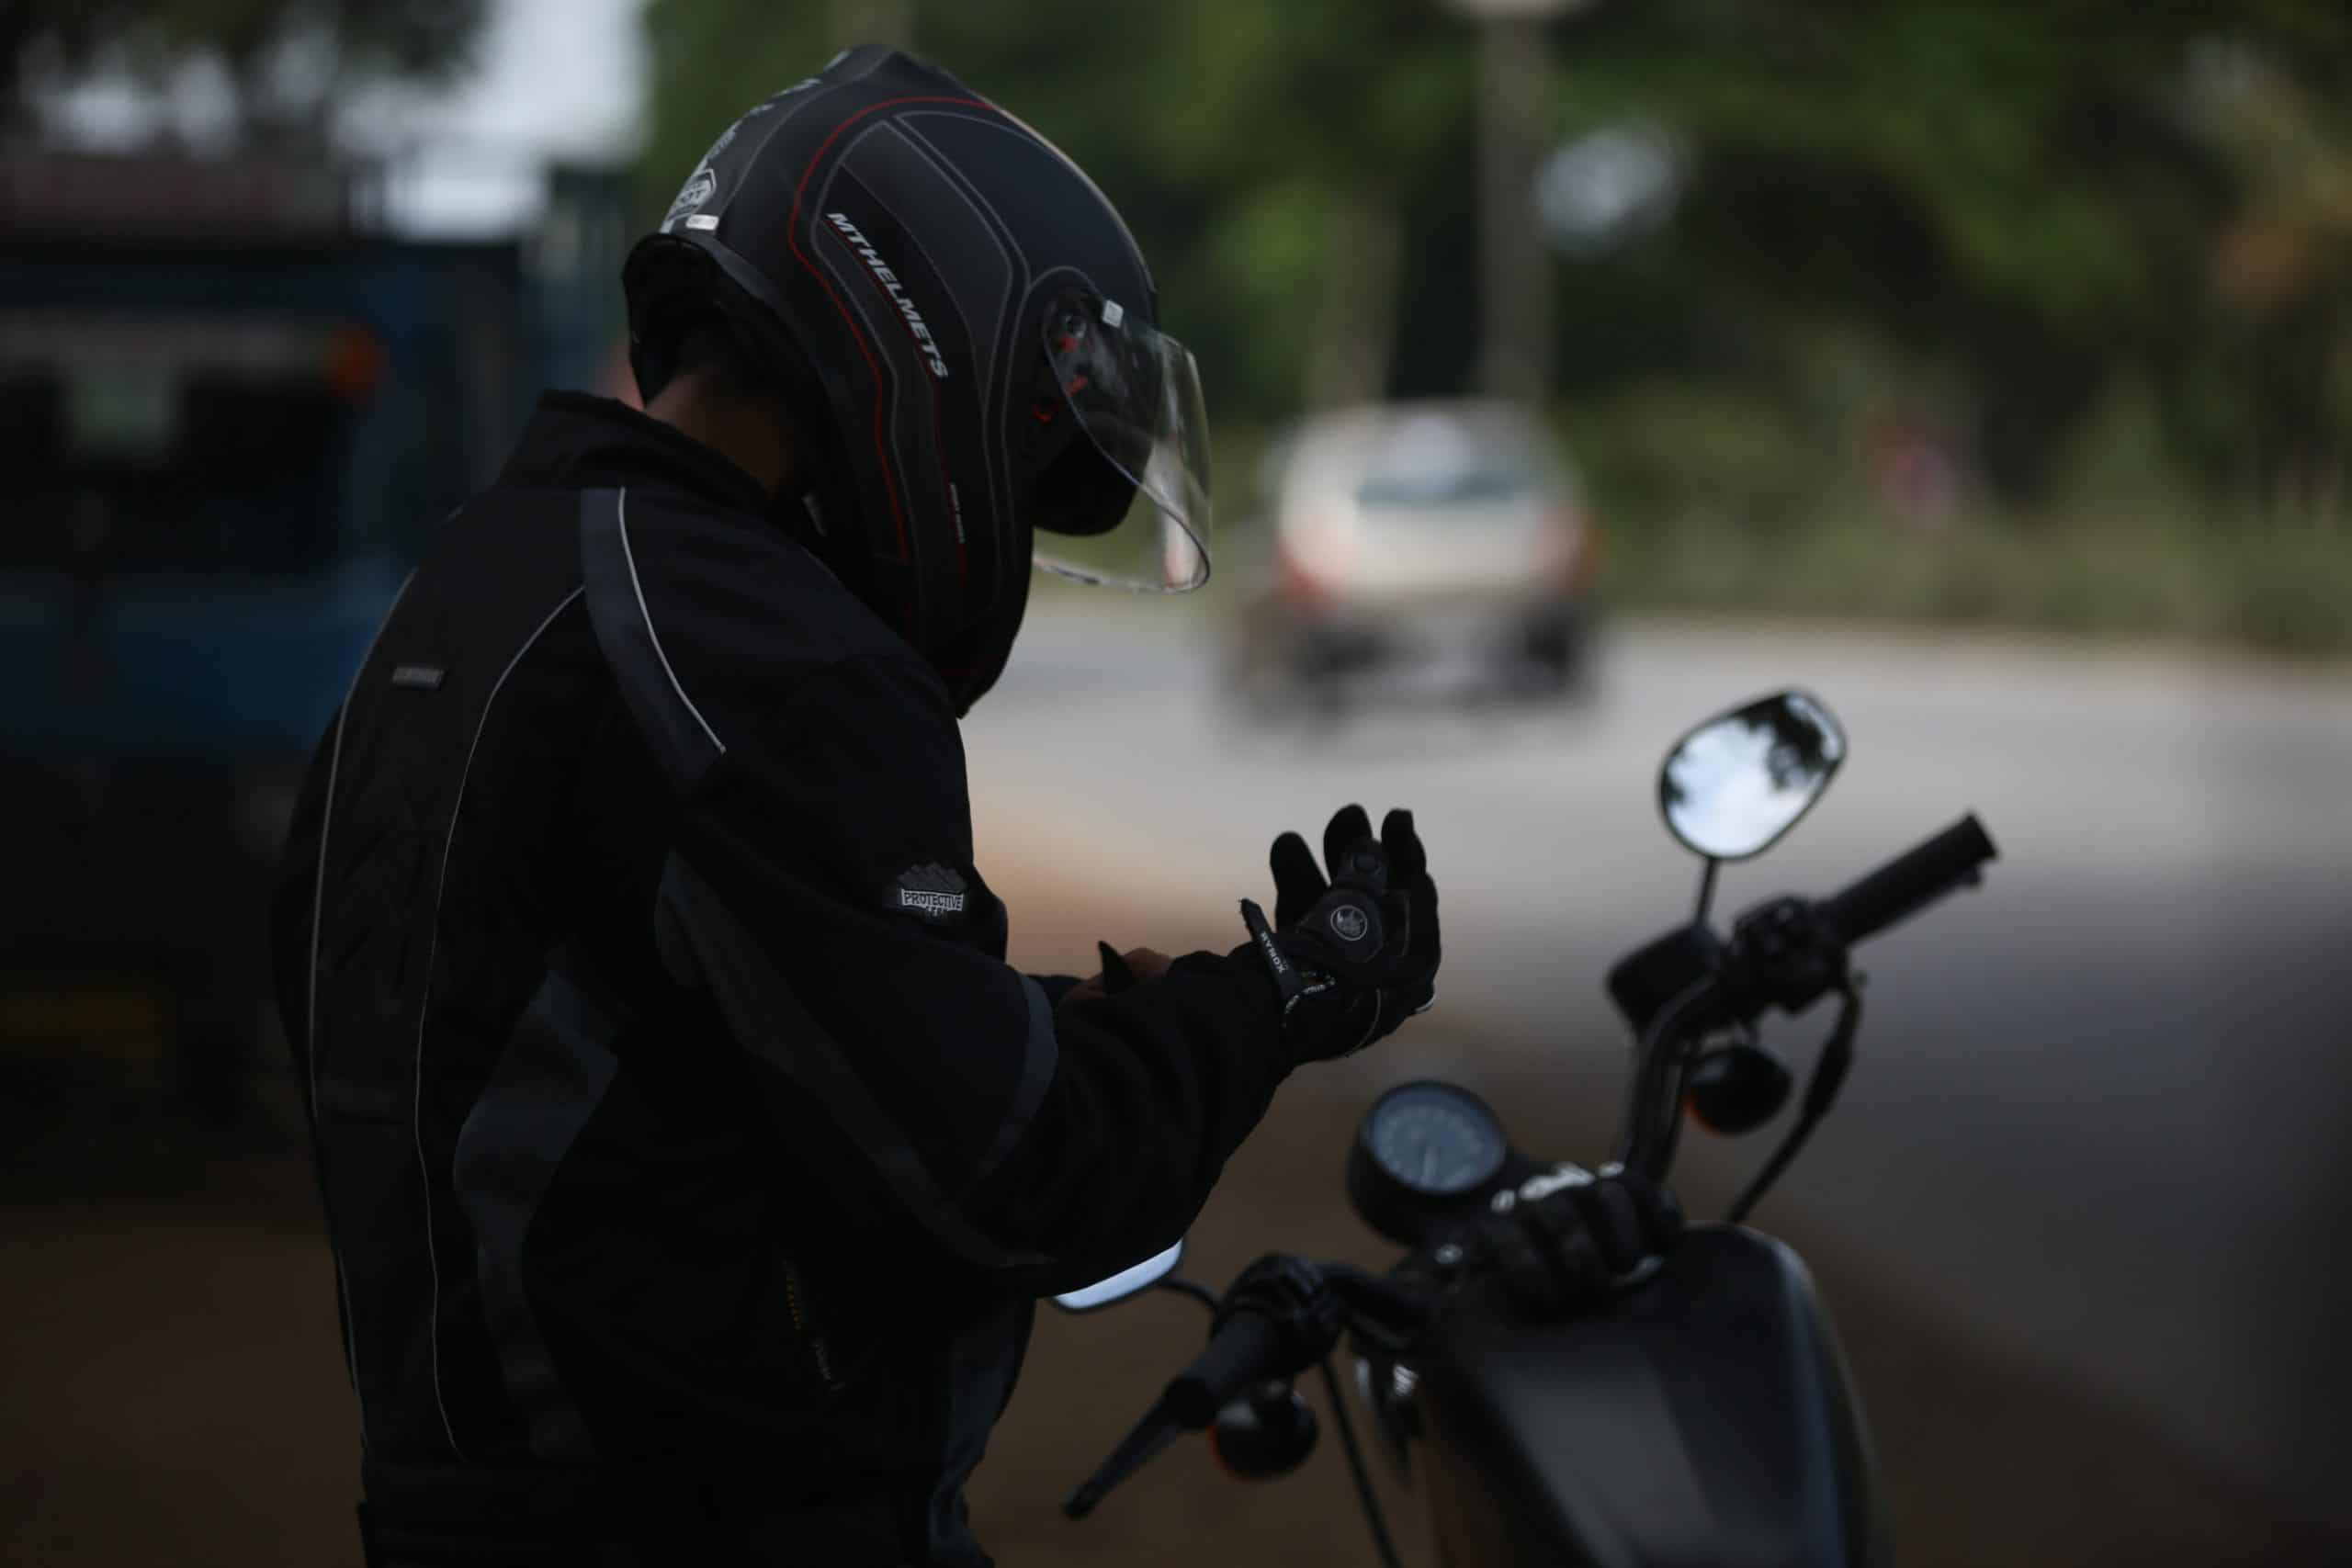 New helmet with VR technology will save many motorcyclists’ lives